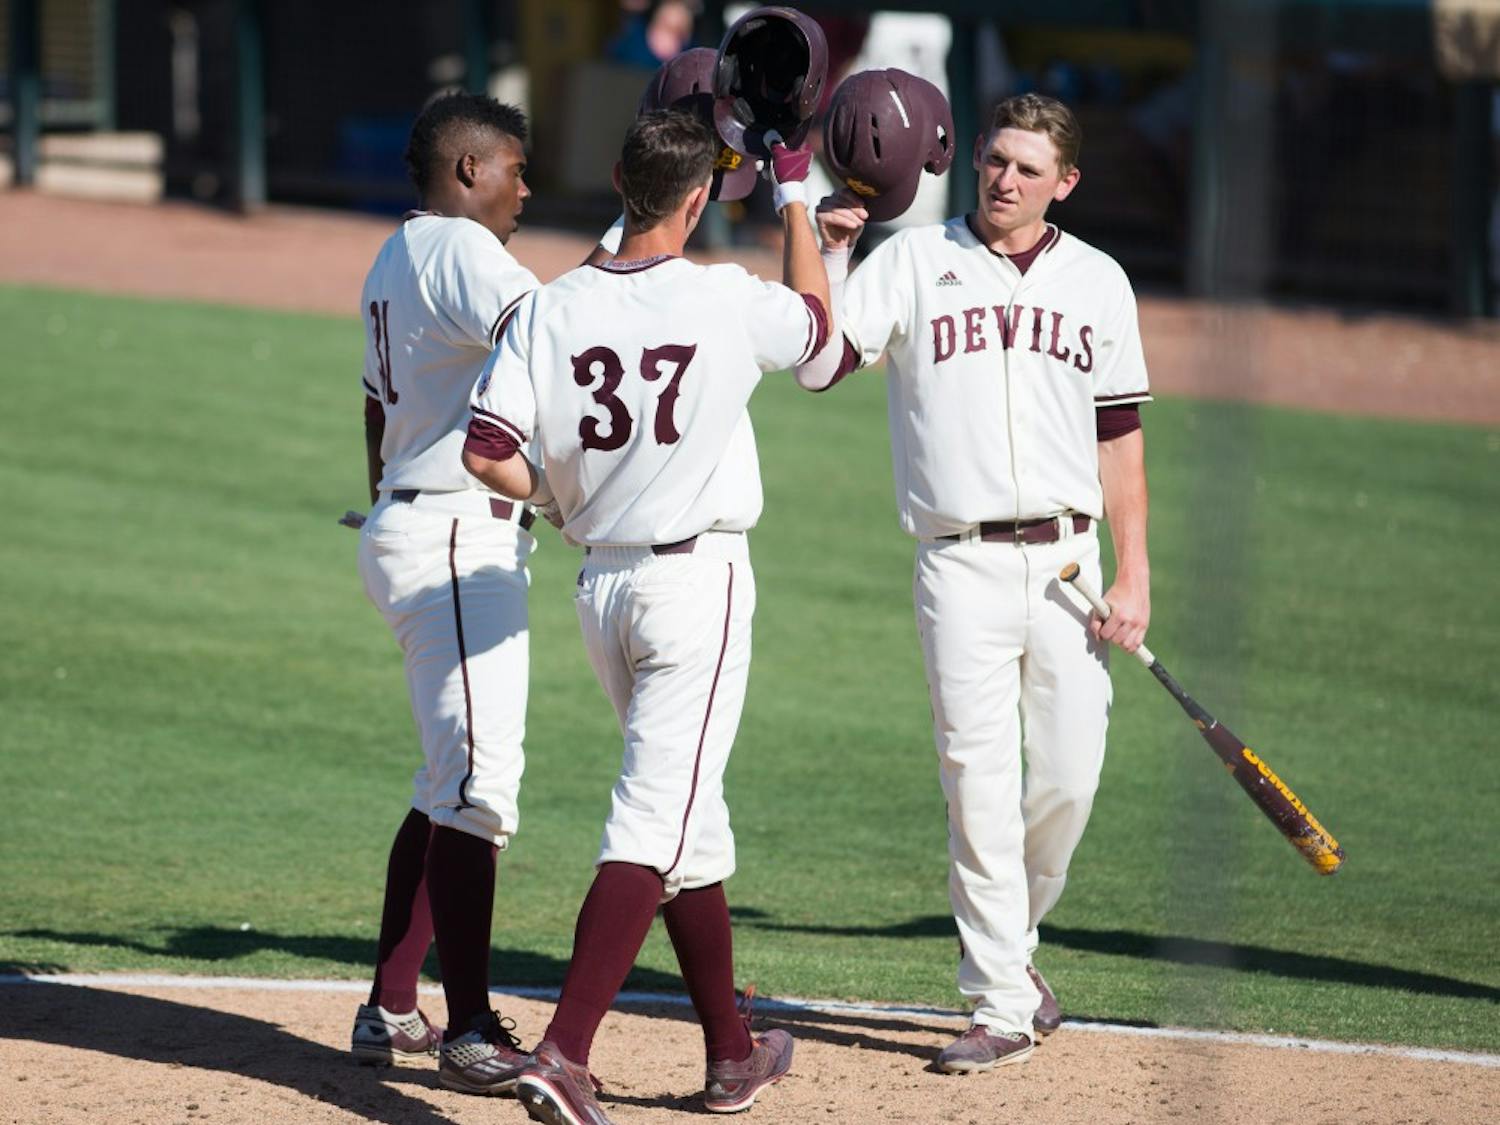 Junior shortstop Colby Woodmansee taps helmets with his teammates after hitting a home run during a game against USC on Sunday, May 29, 2016, at Phoenix Municipal Stadium in Phoenix. The Trojans defeated the Sun Devils 31-9.